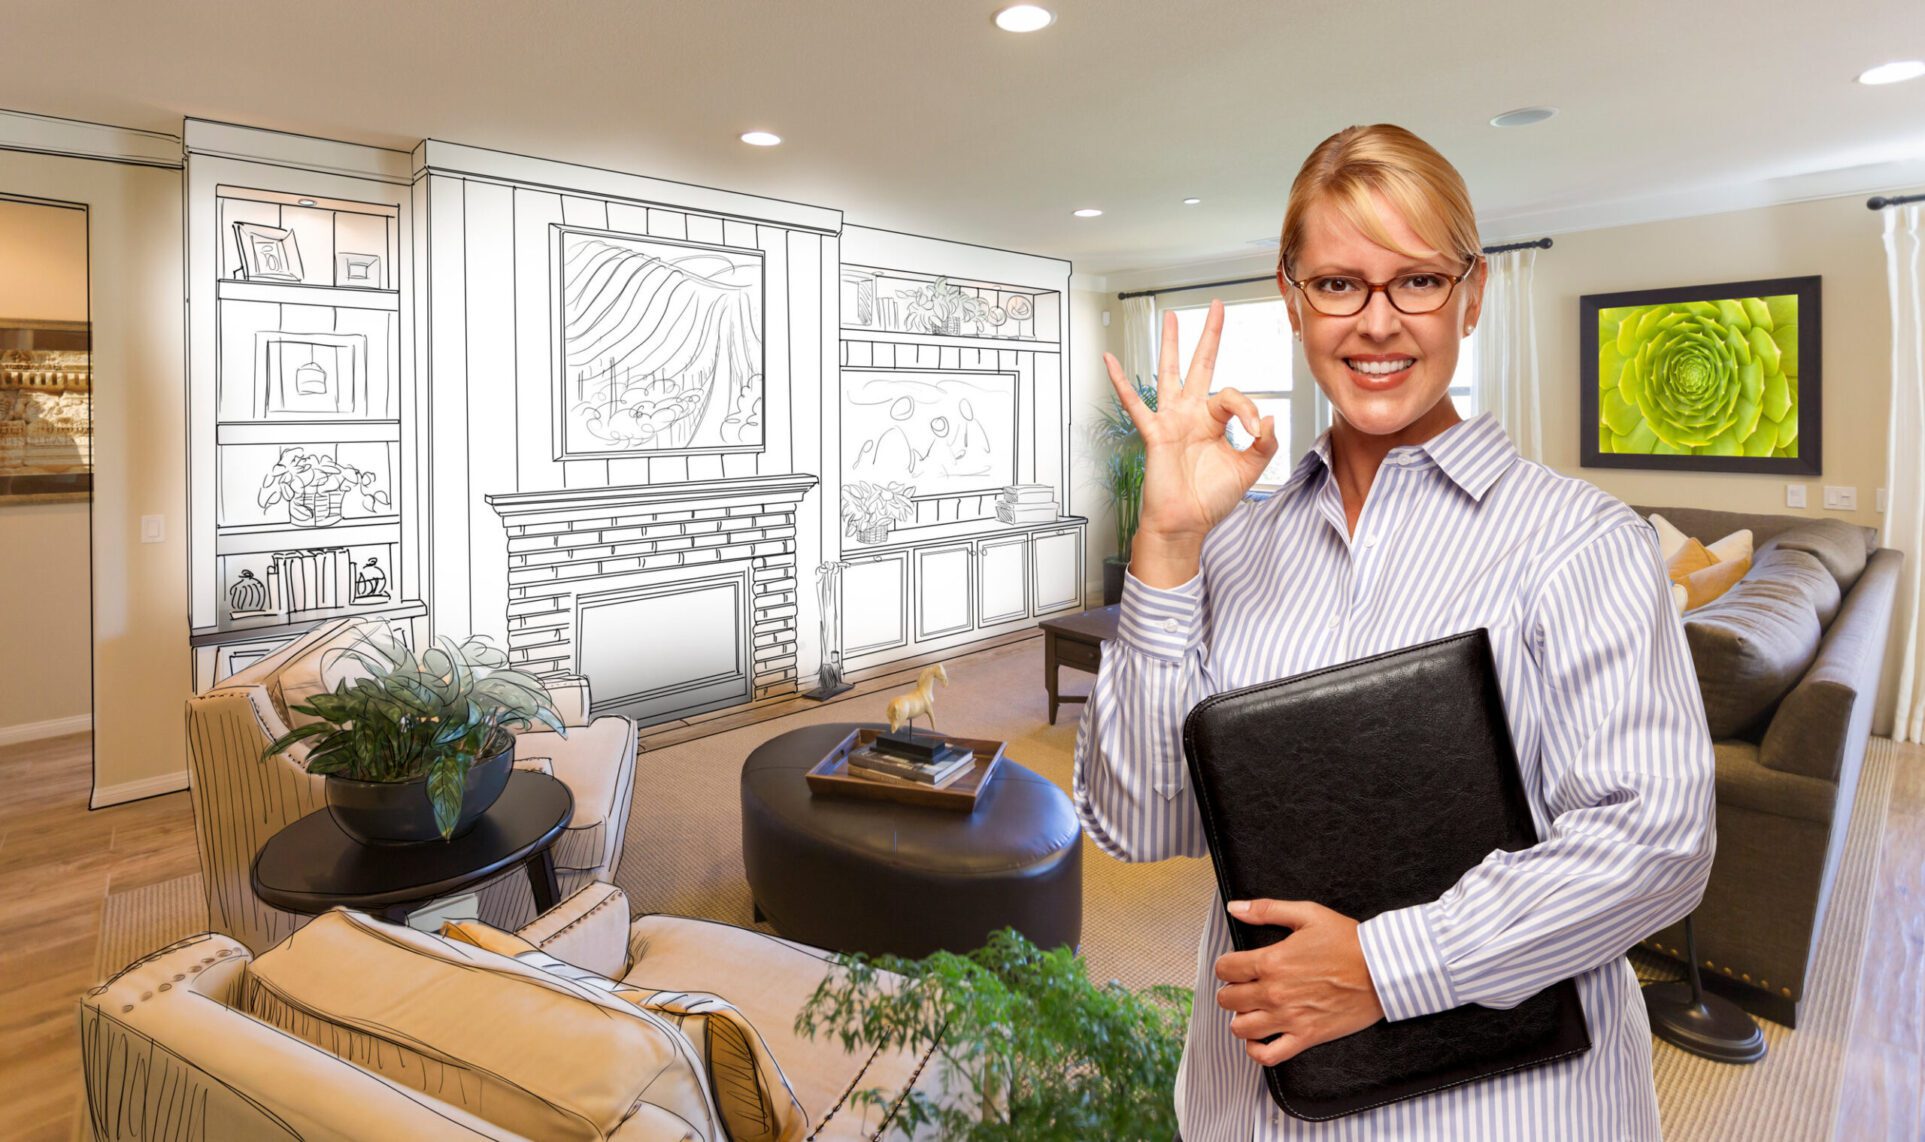 Happy Woman with Okay Sign Over Custom Living Room and Design Drawing.